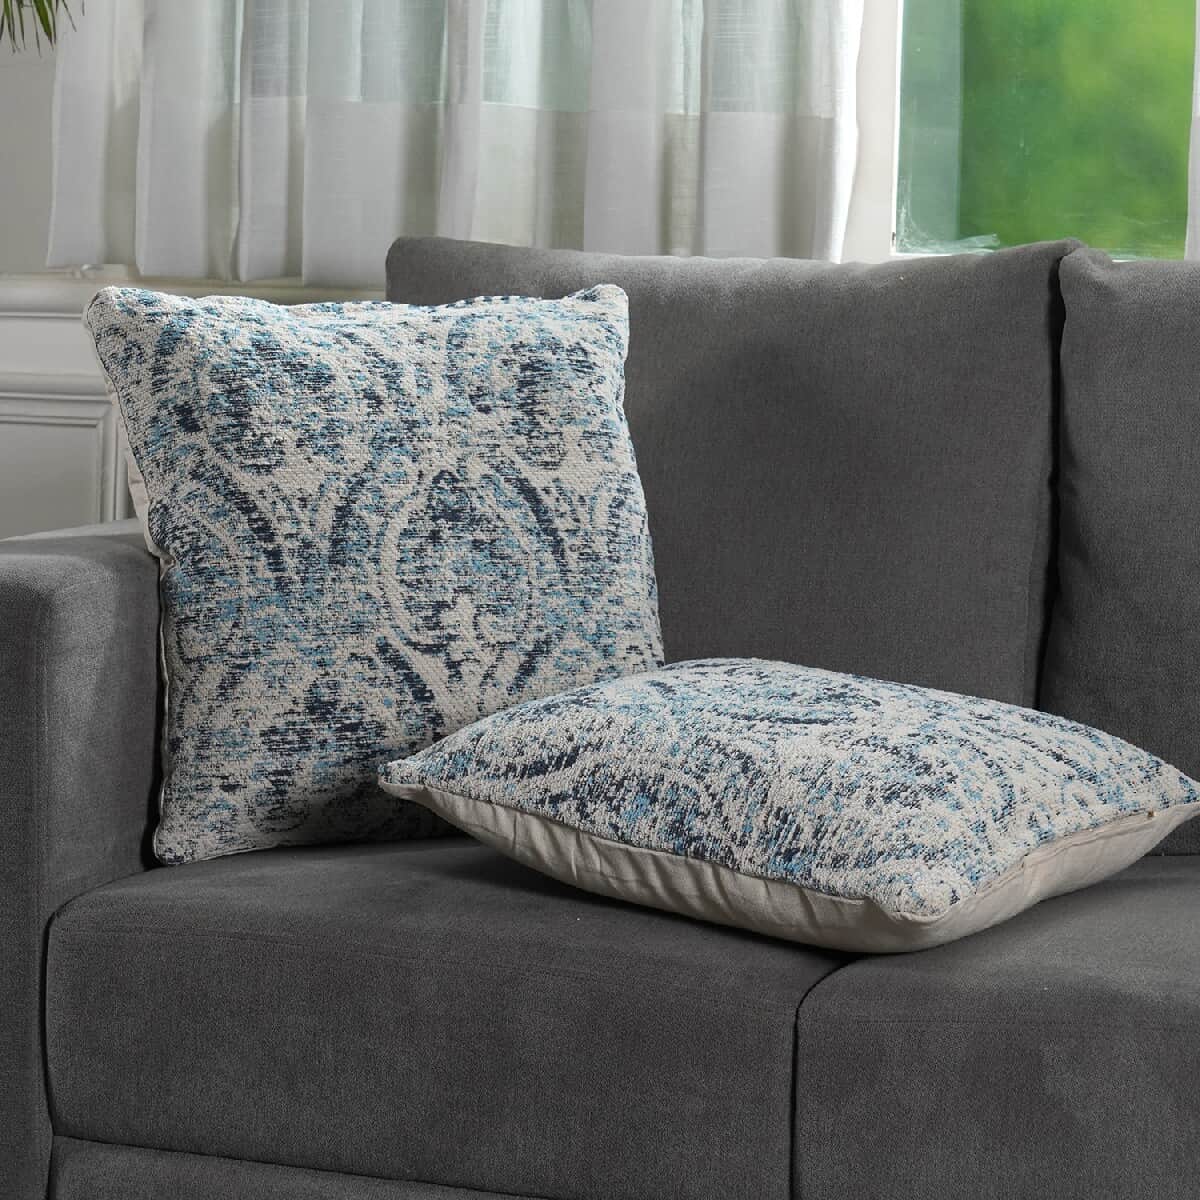 Set of 2 Gray Jacquard Woven Cushion Cover (18x18) image number 1